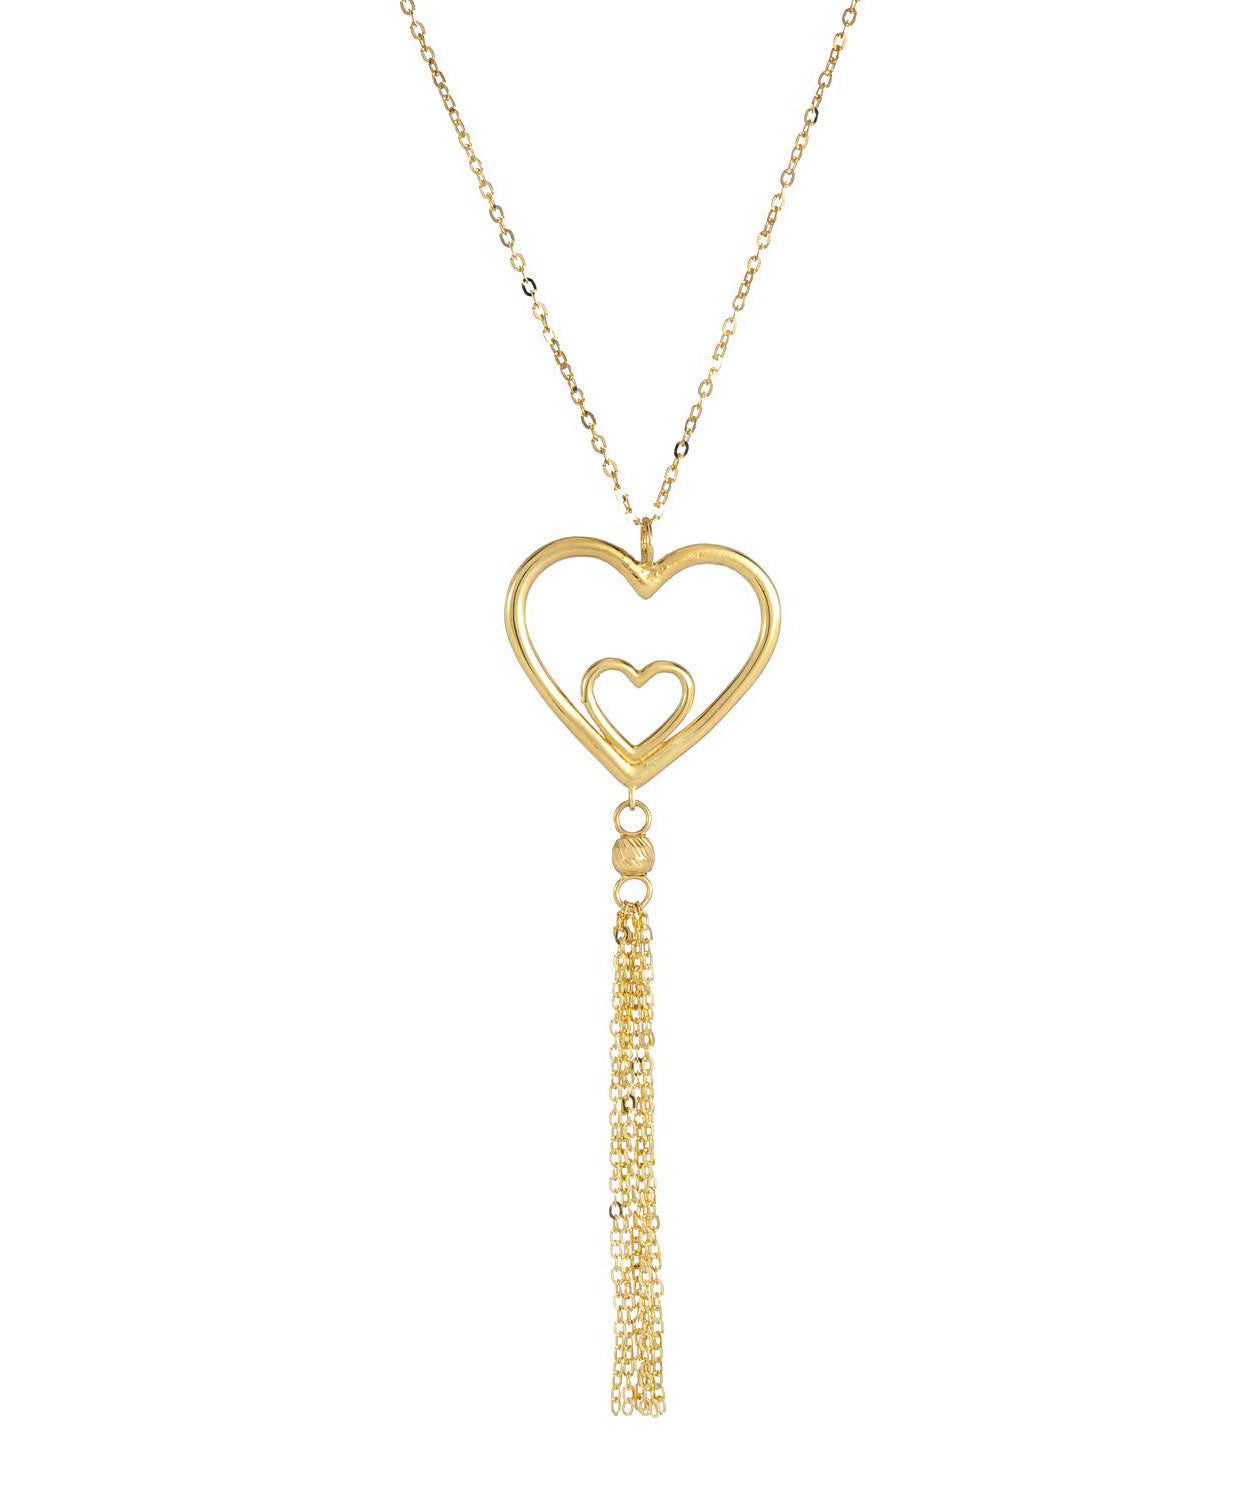 14k Gold Double Heart Pendant With Chain - Made in Italy View 1